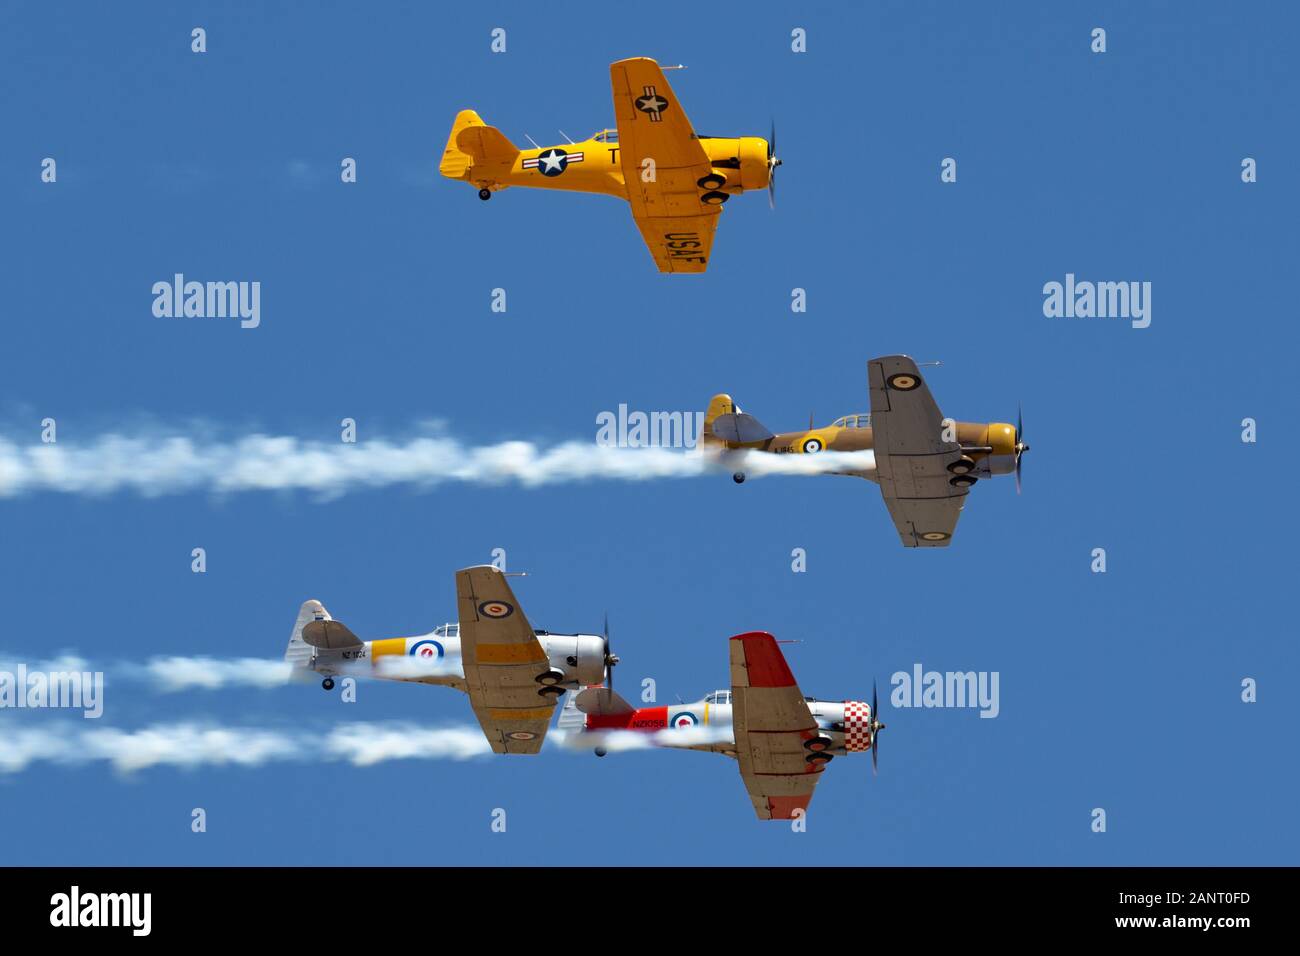 Four North American AT-6 Harvard single engine military training aircraft from World War II flying in formation. Stock Photo